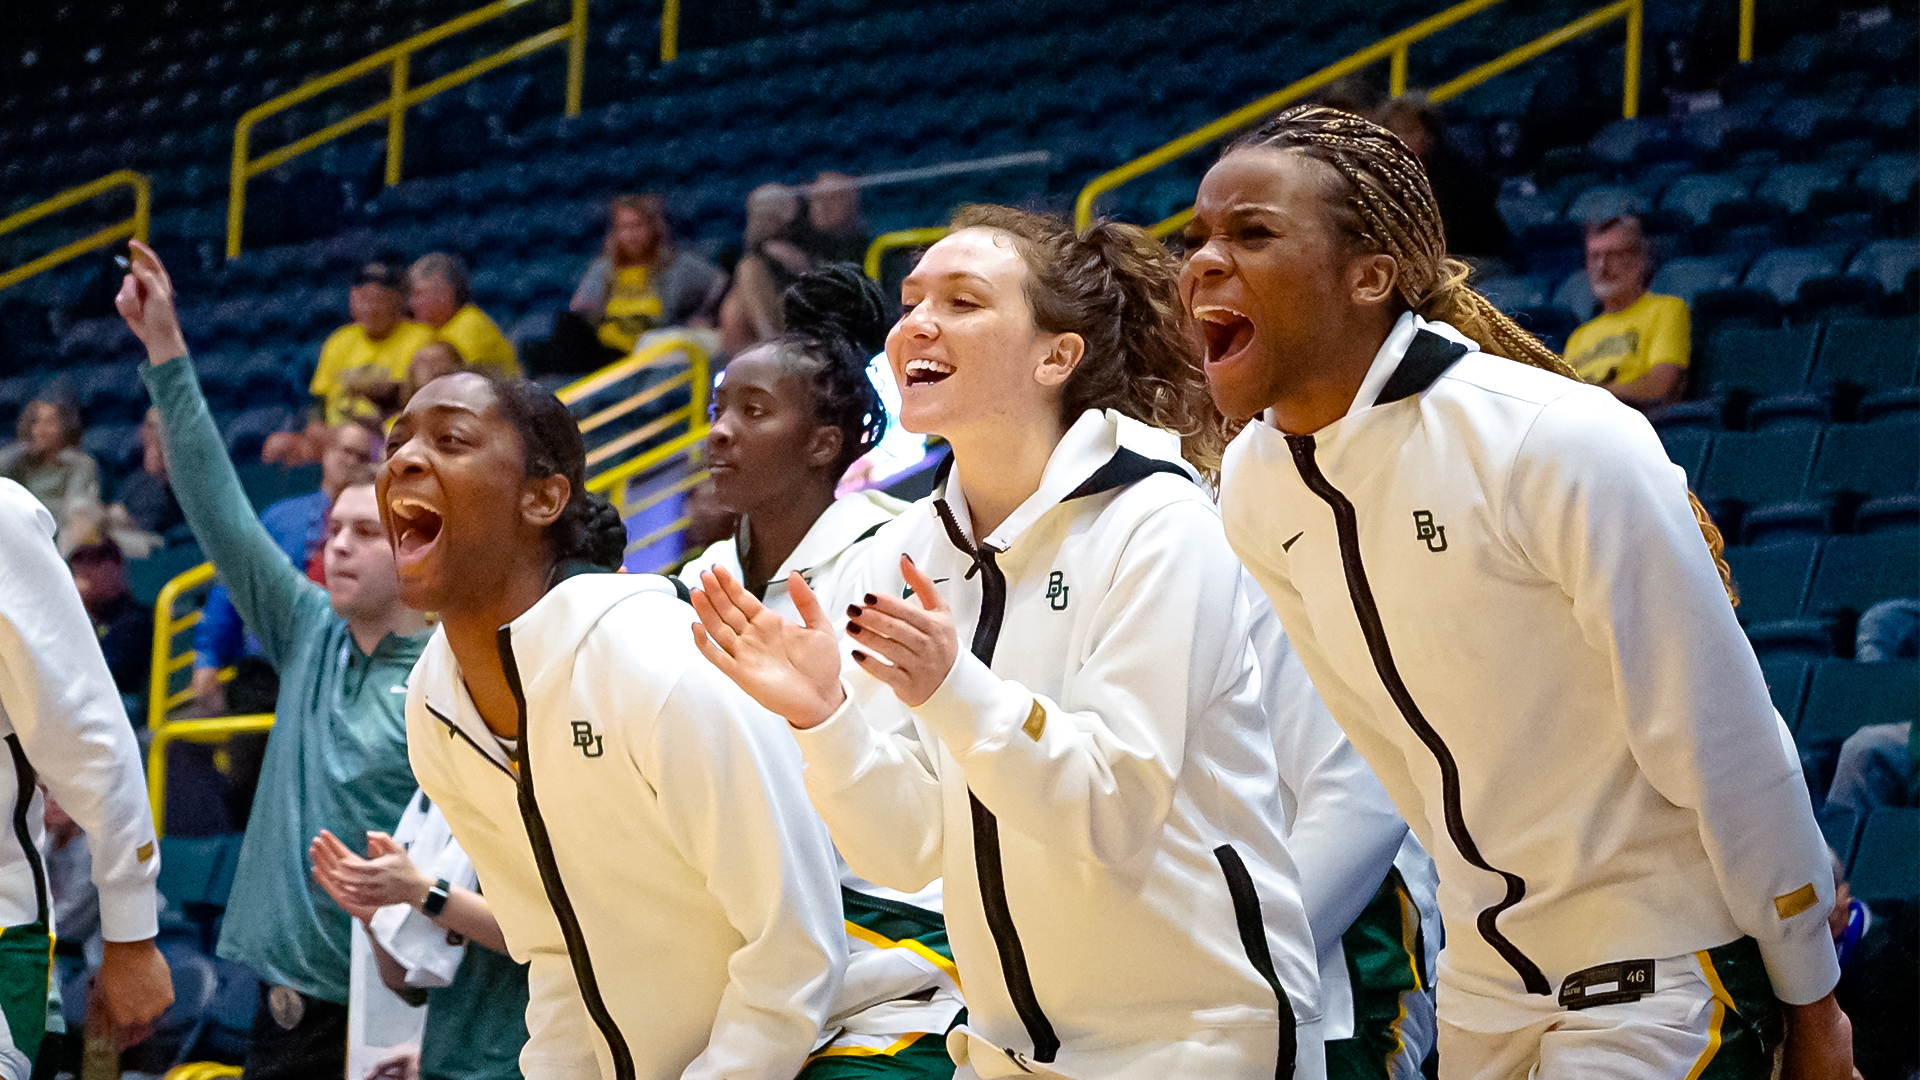 Baylor Women Remain Ranked No. 21 in Latest AP Poll